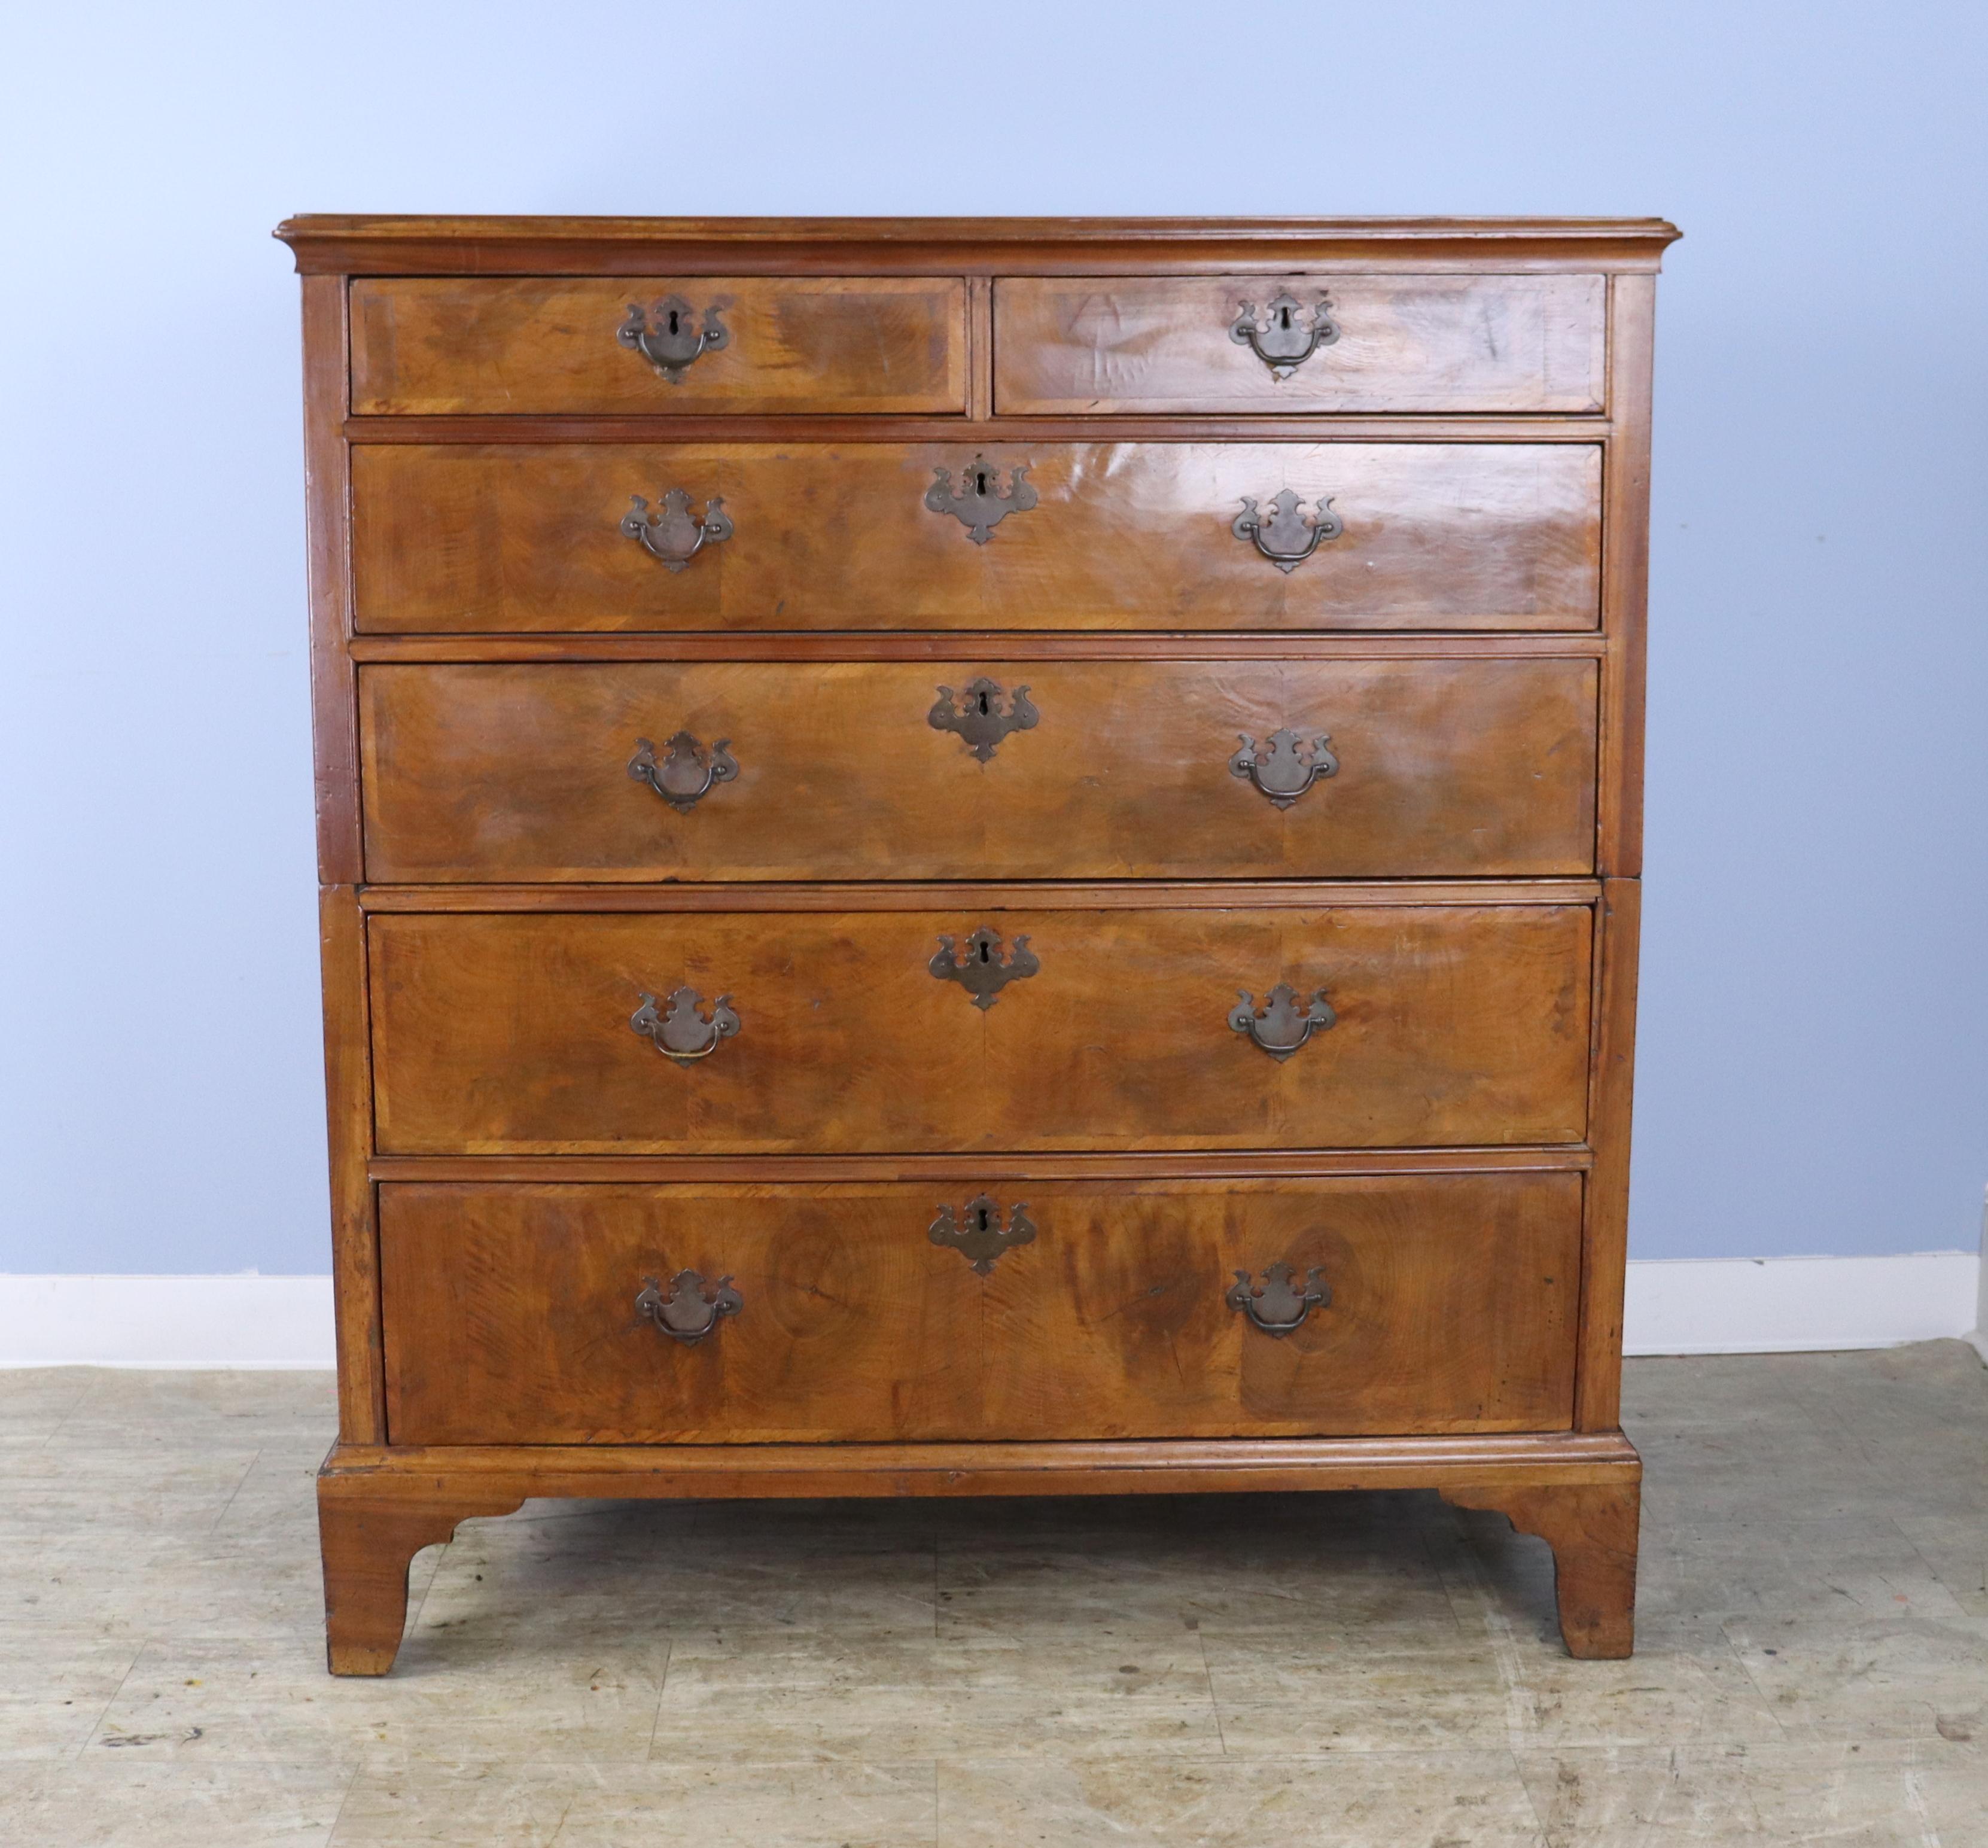 This George I dresser is in very good condition for it's age.  The bookmatched walnut veneer is lovely, with good patina and warm walnut color.  Original ogee feet and brasses.  Classic 2 over 4 construction.  